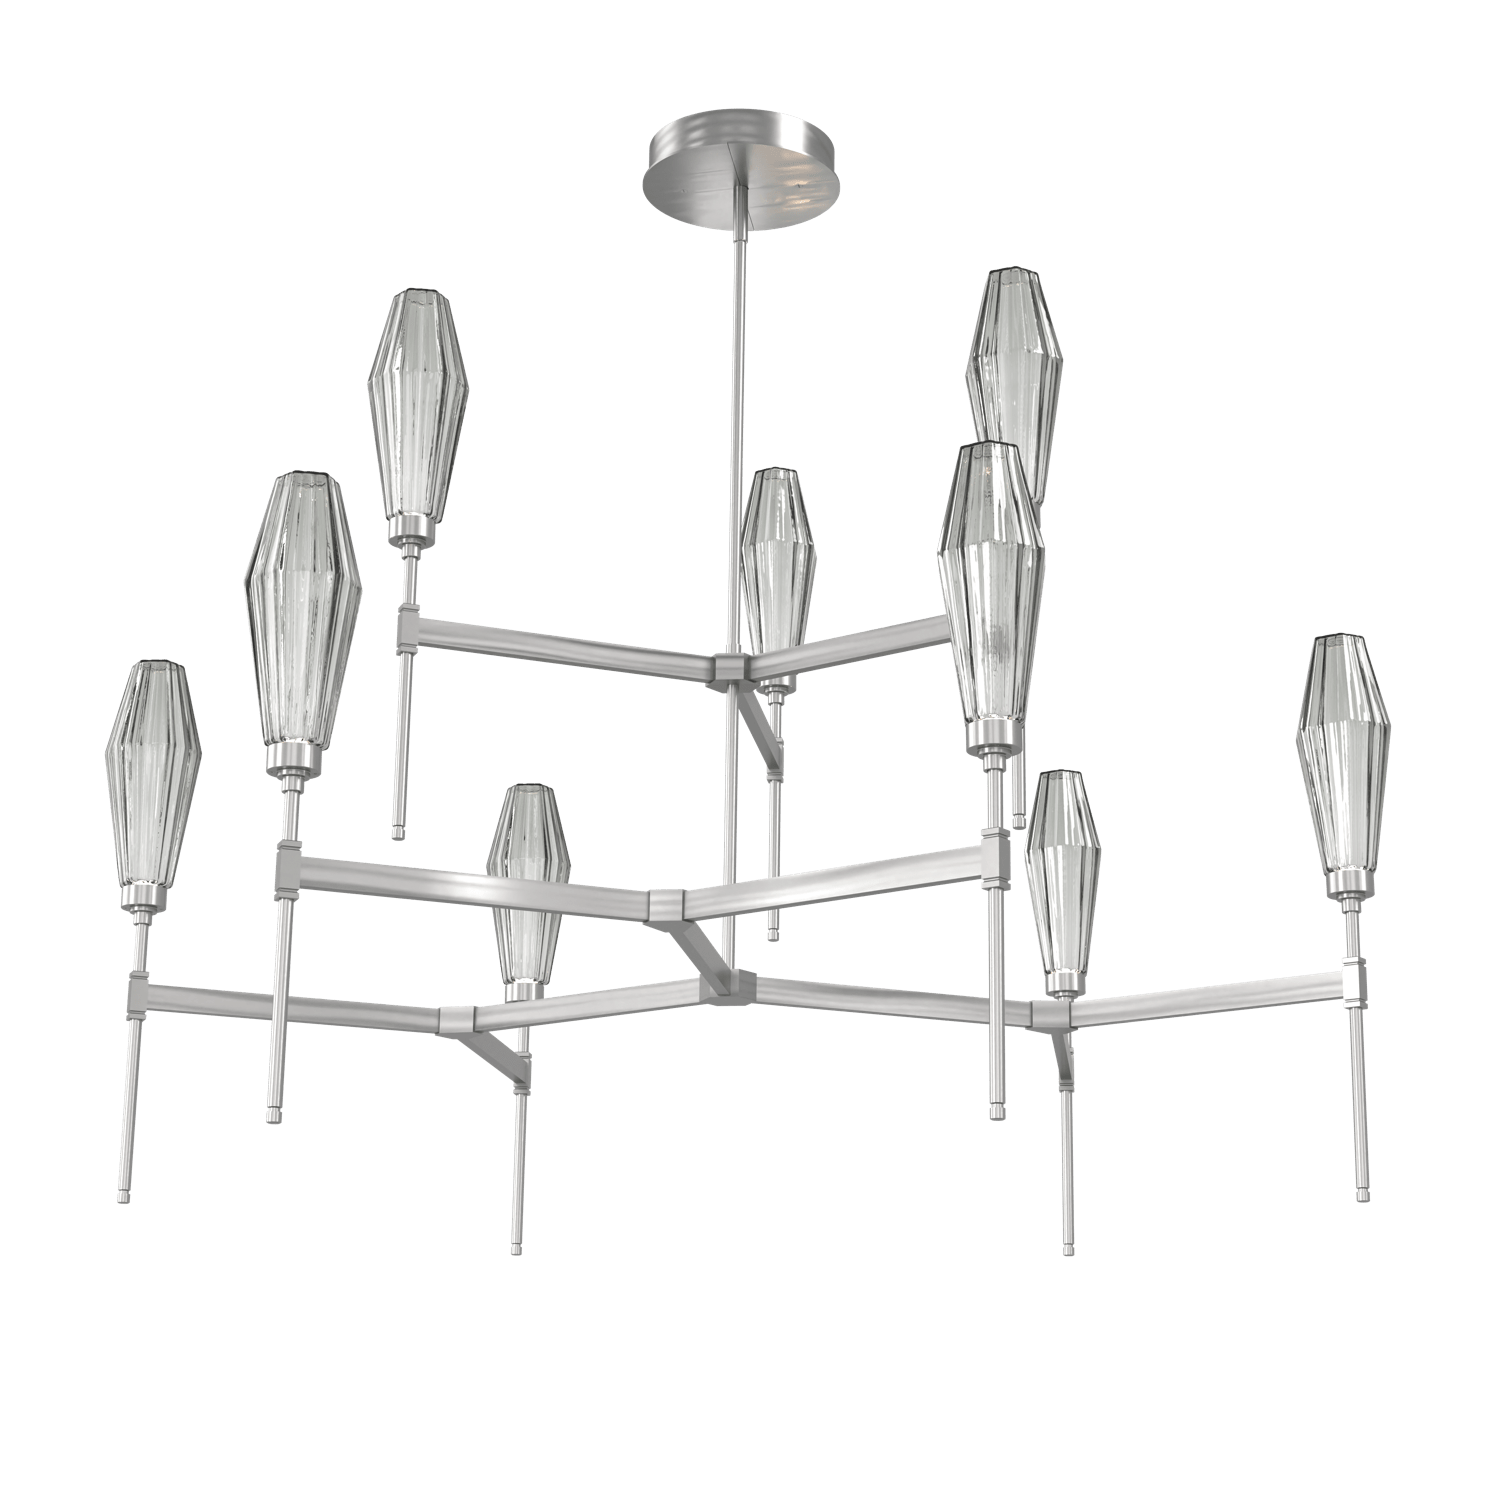 CHB0049-54-SN-RS-Hammerton-Studio-Aalto-54-inch-round-two-tier-belvedere-chandelier-with-satin-nickel-finish-and-optic-ribbed-smoke-glass-shades-and-LED-lamping